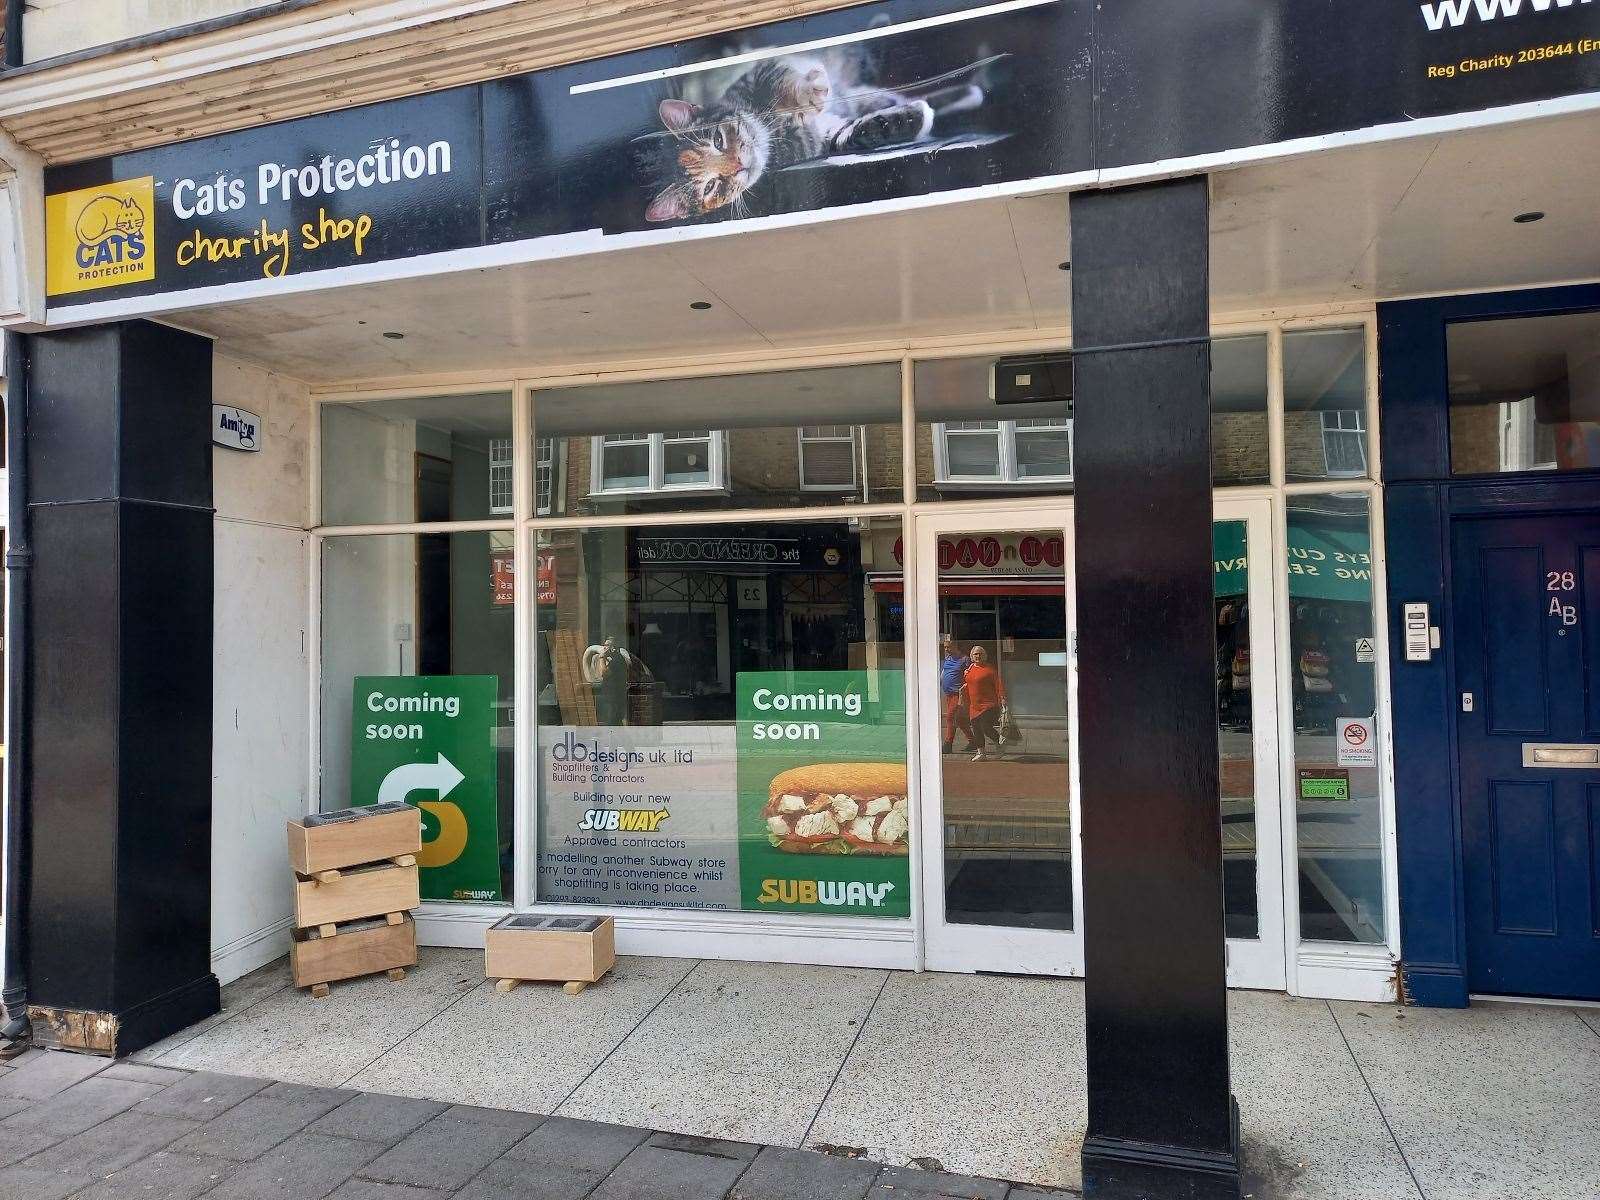 Signs saying a Subway is "coming soon" to Herne Bay have been placed in the William Street shopfront today